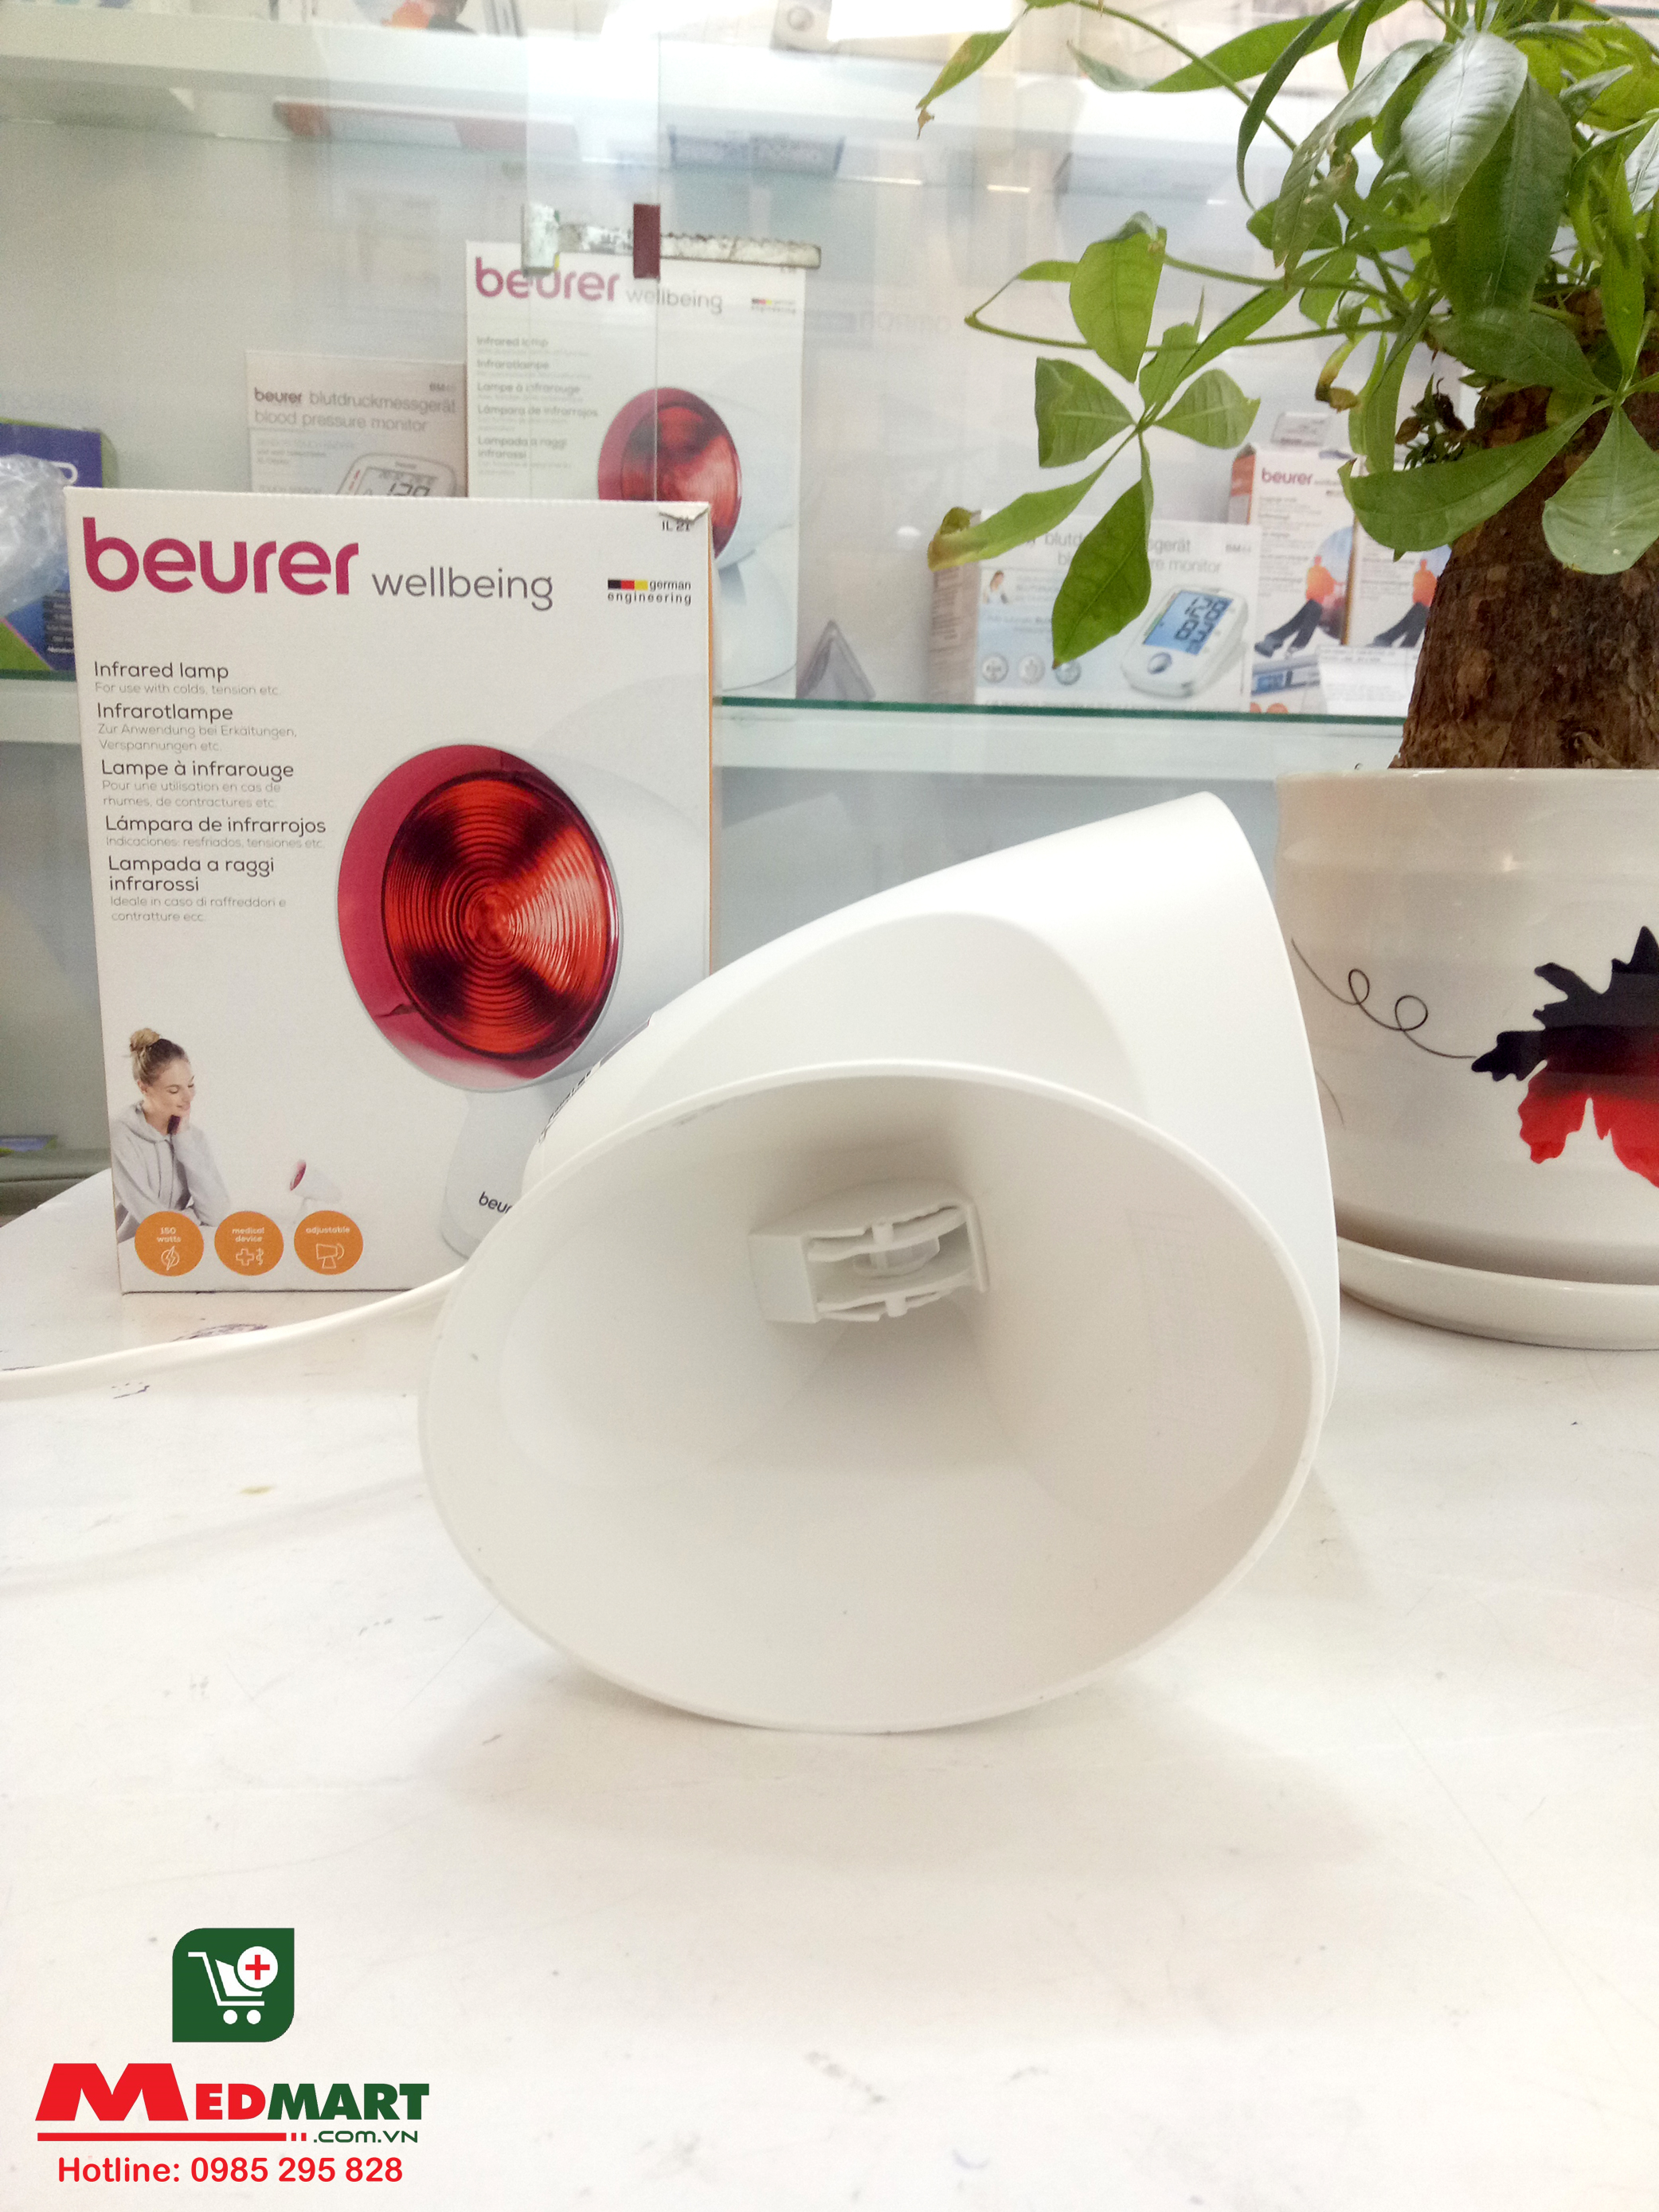 EAN 4211125616007 - Beurer Il21 Infrared Heat Therapry Lamp 150w Powerful  Muscle Aches Pain Relief | upcitemdb.com